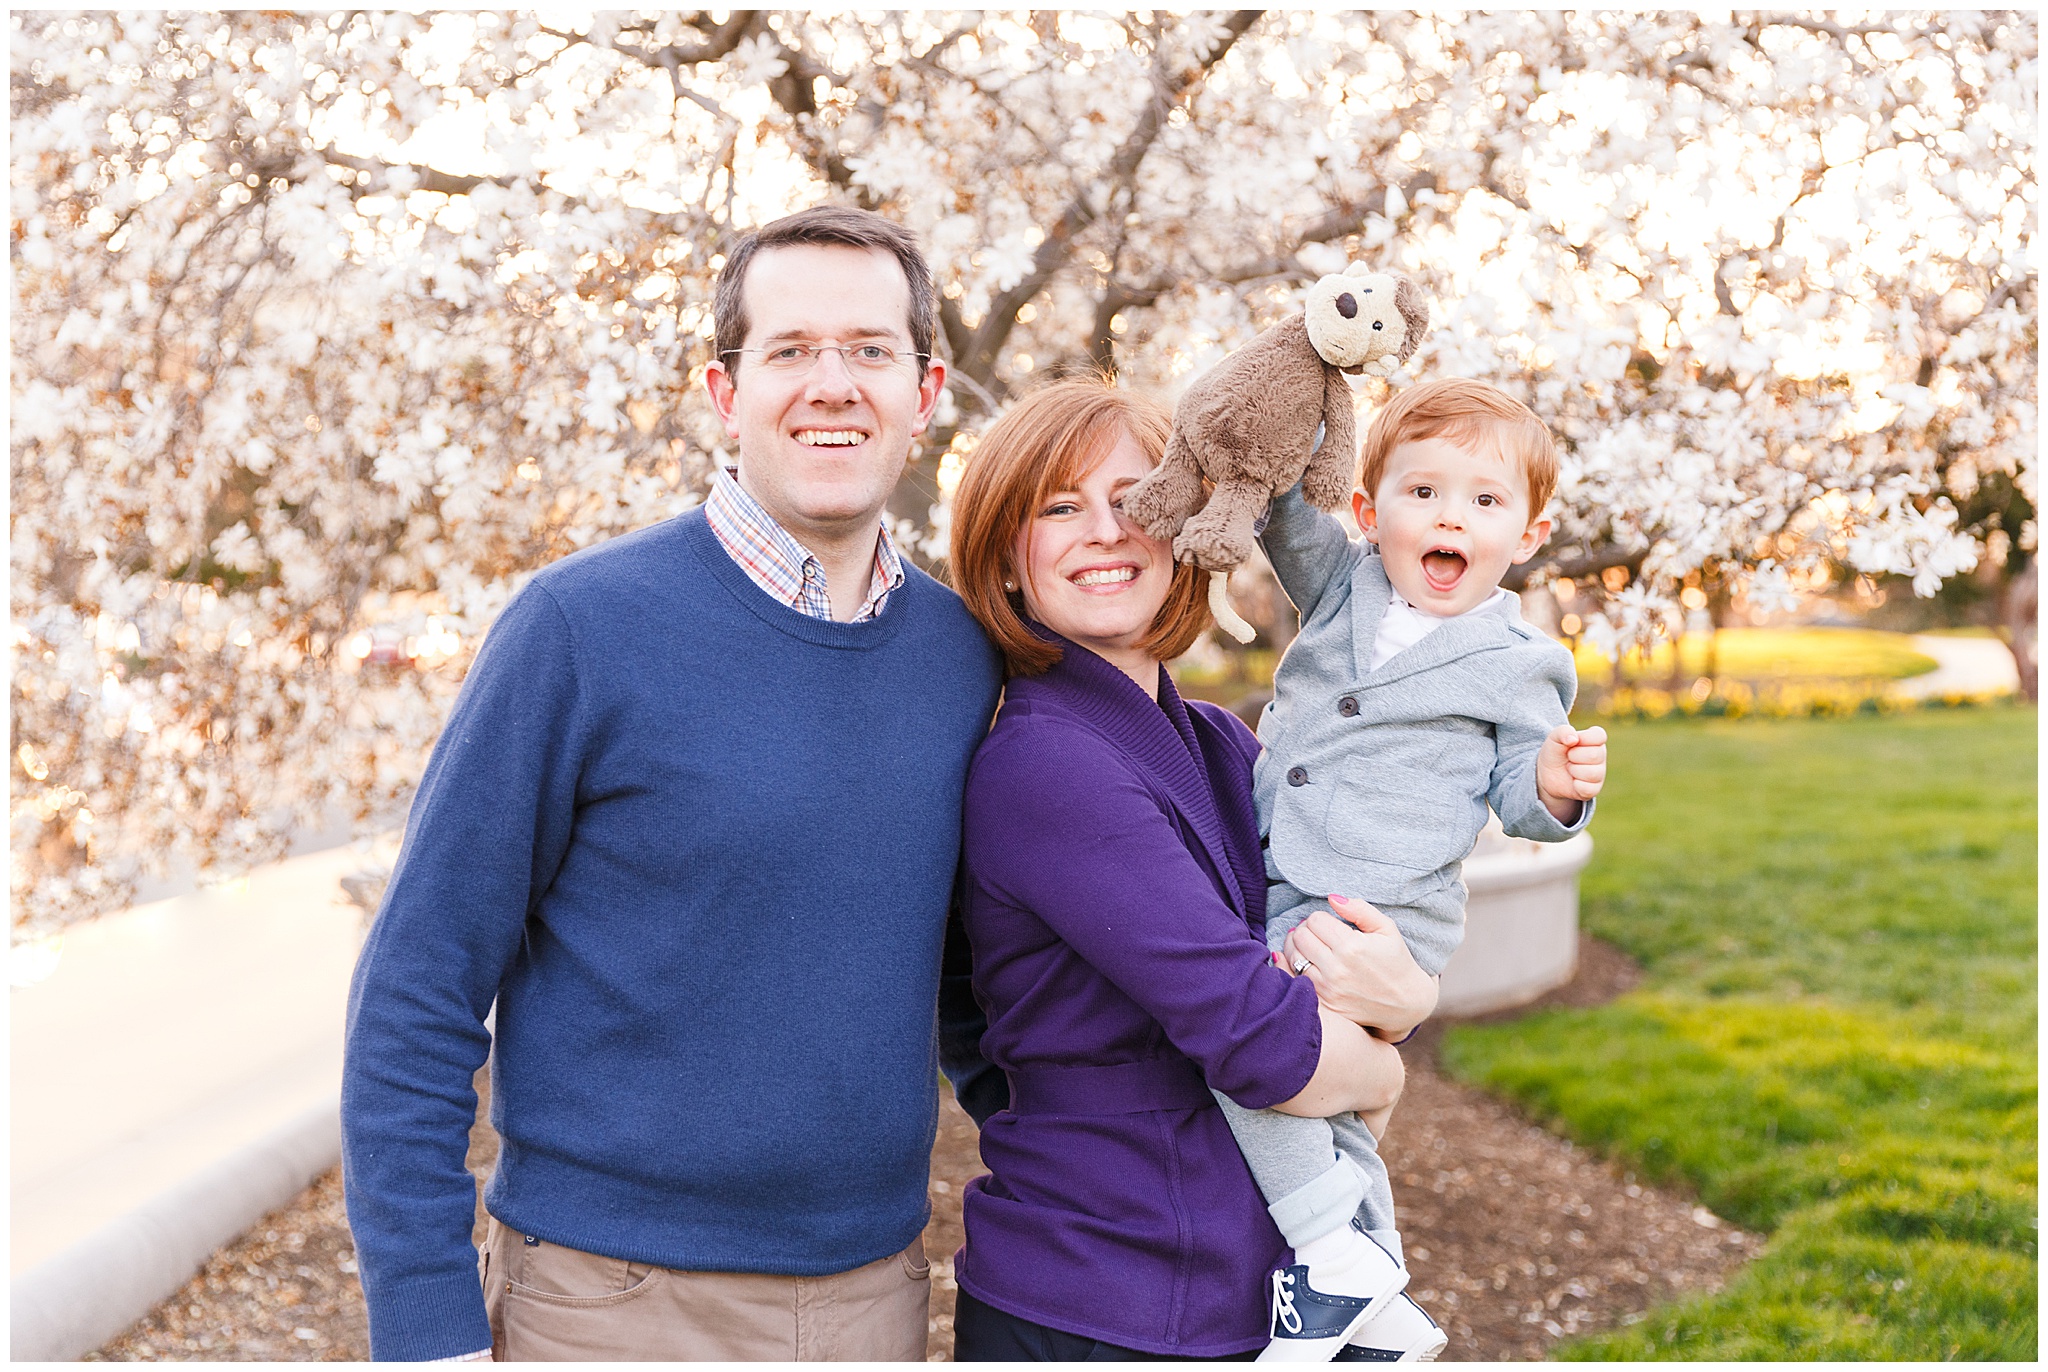 Outtake of Cherry Blossom Family Session by Photographer Bethany Kofmehl